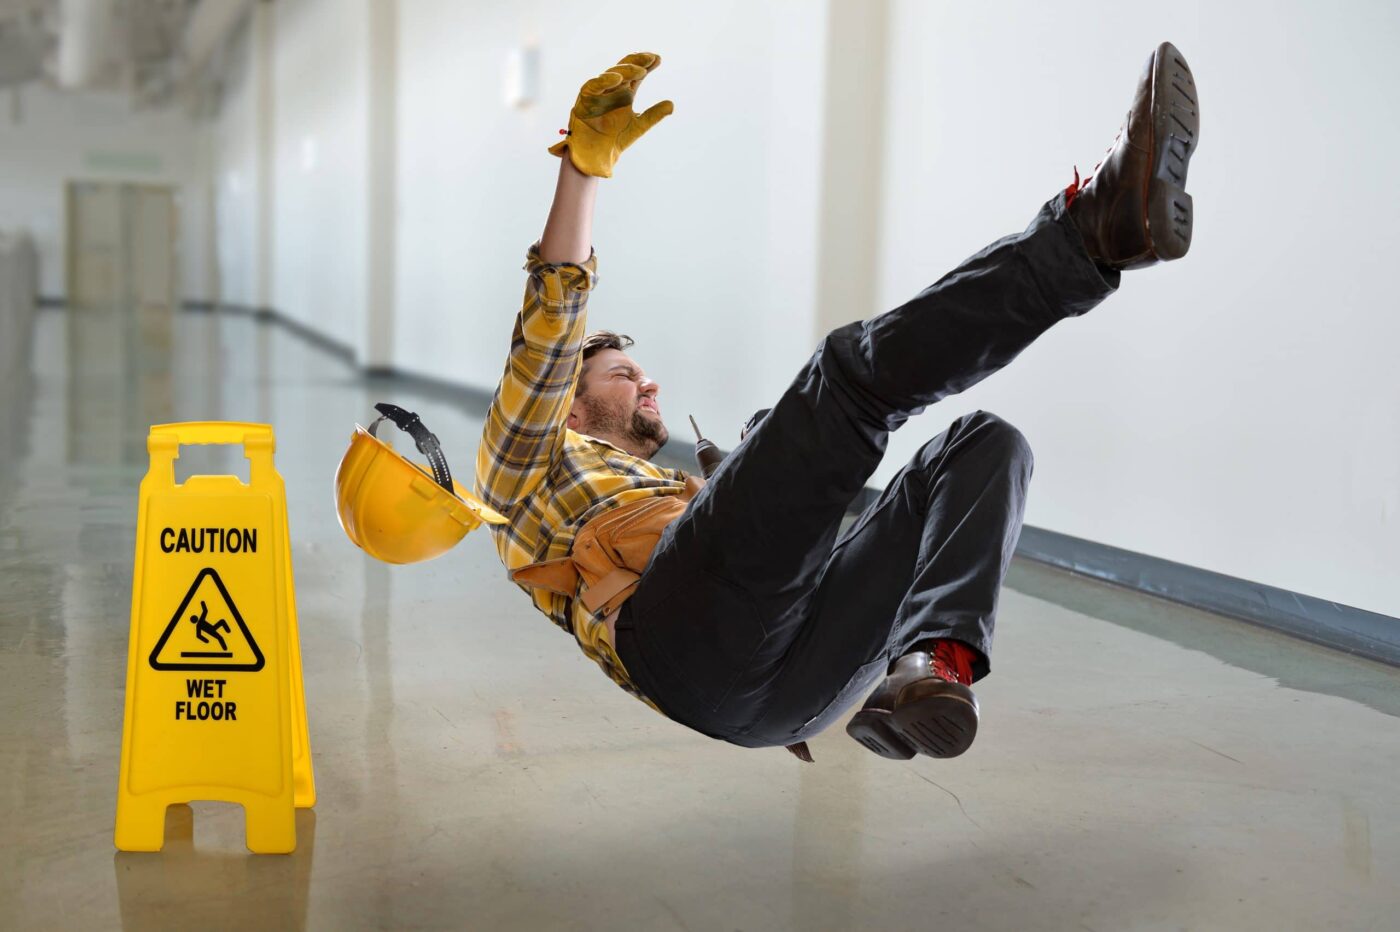 Worker in mid-fall on a shiny floor with a caution sign nearby, illustrating a slip and fall incident.